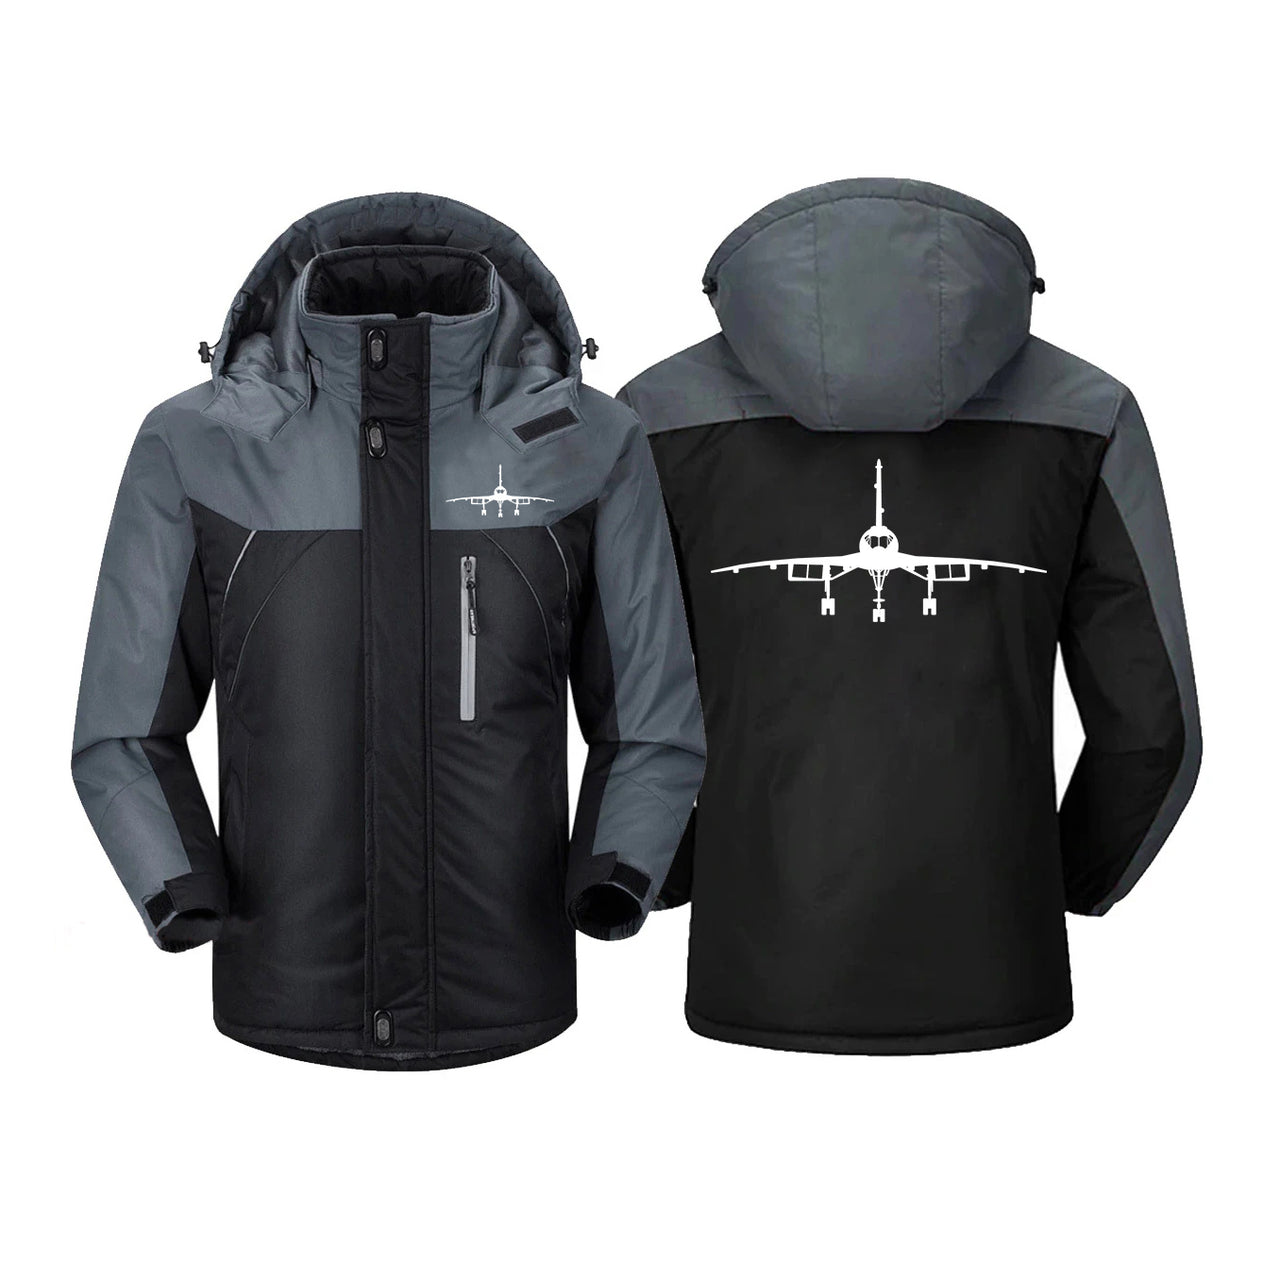 Concorde Silhouette Designed Thick Winter Jackets